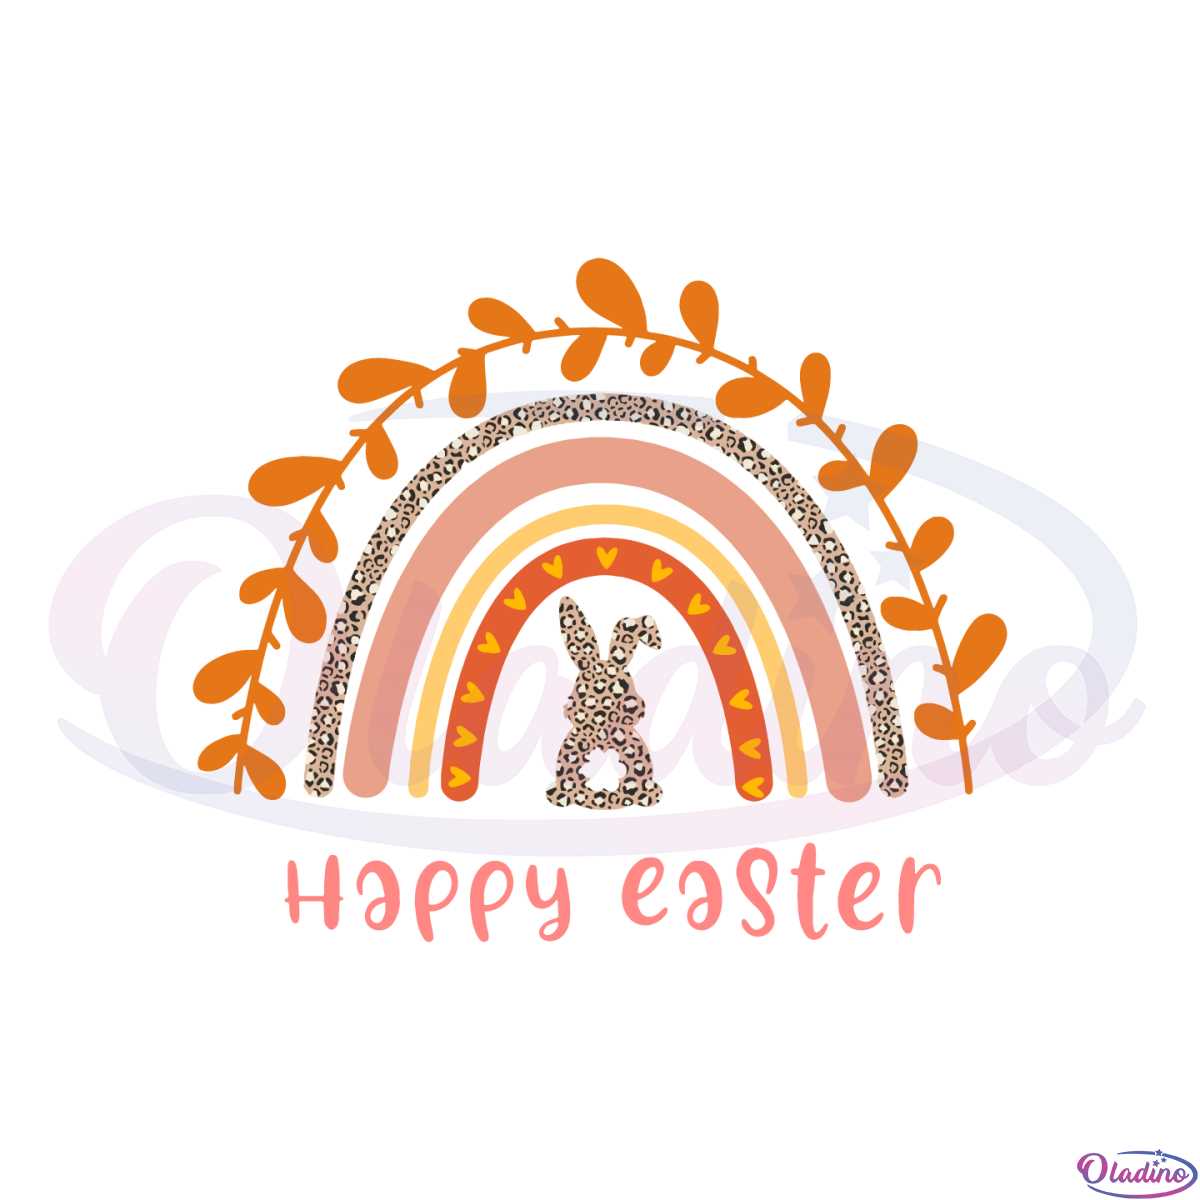 happy-easter-leopard-rainbow-bunny-svg-graphic-designs-files